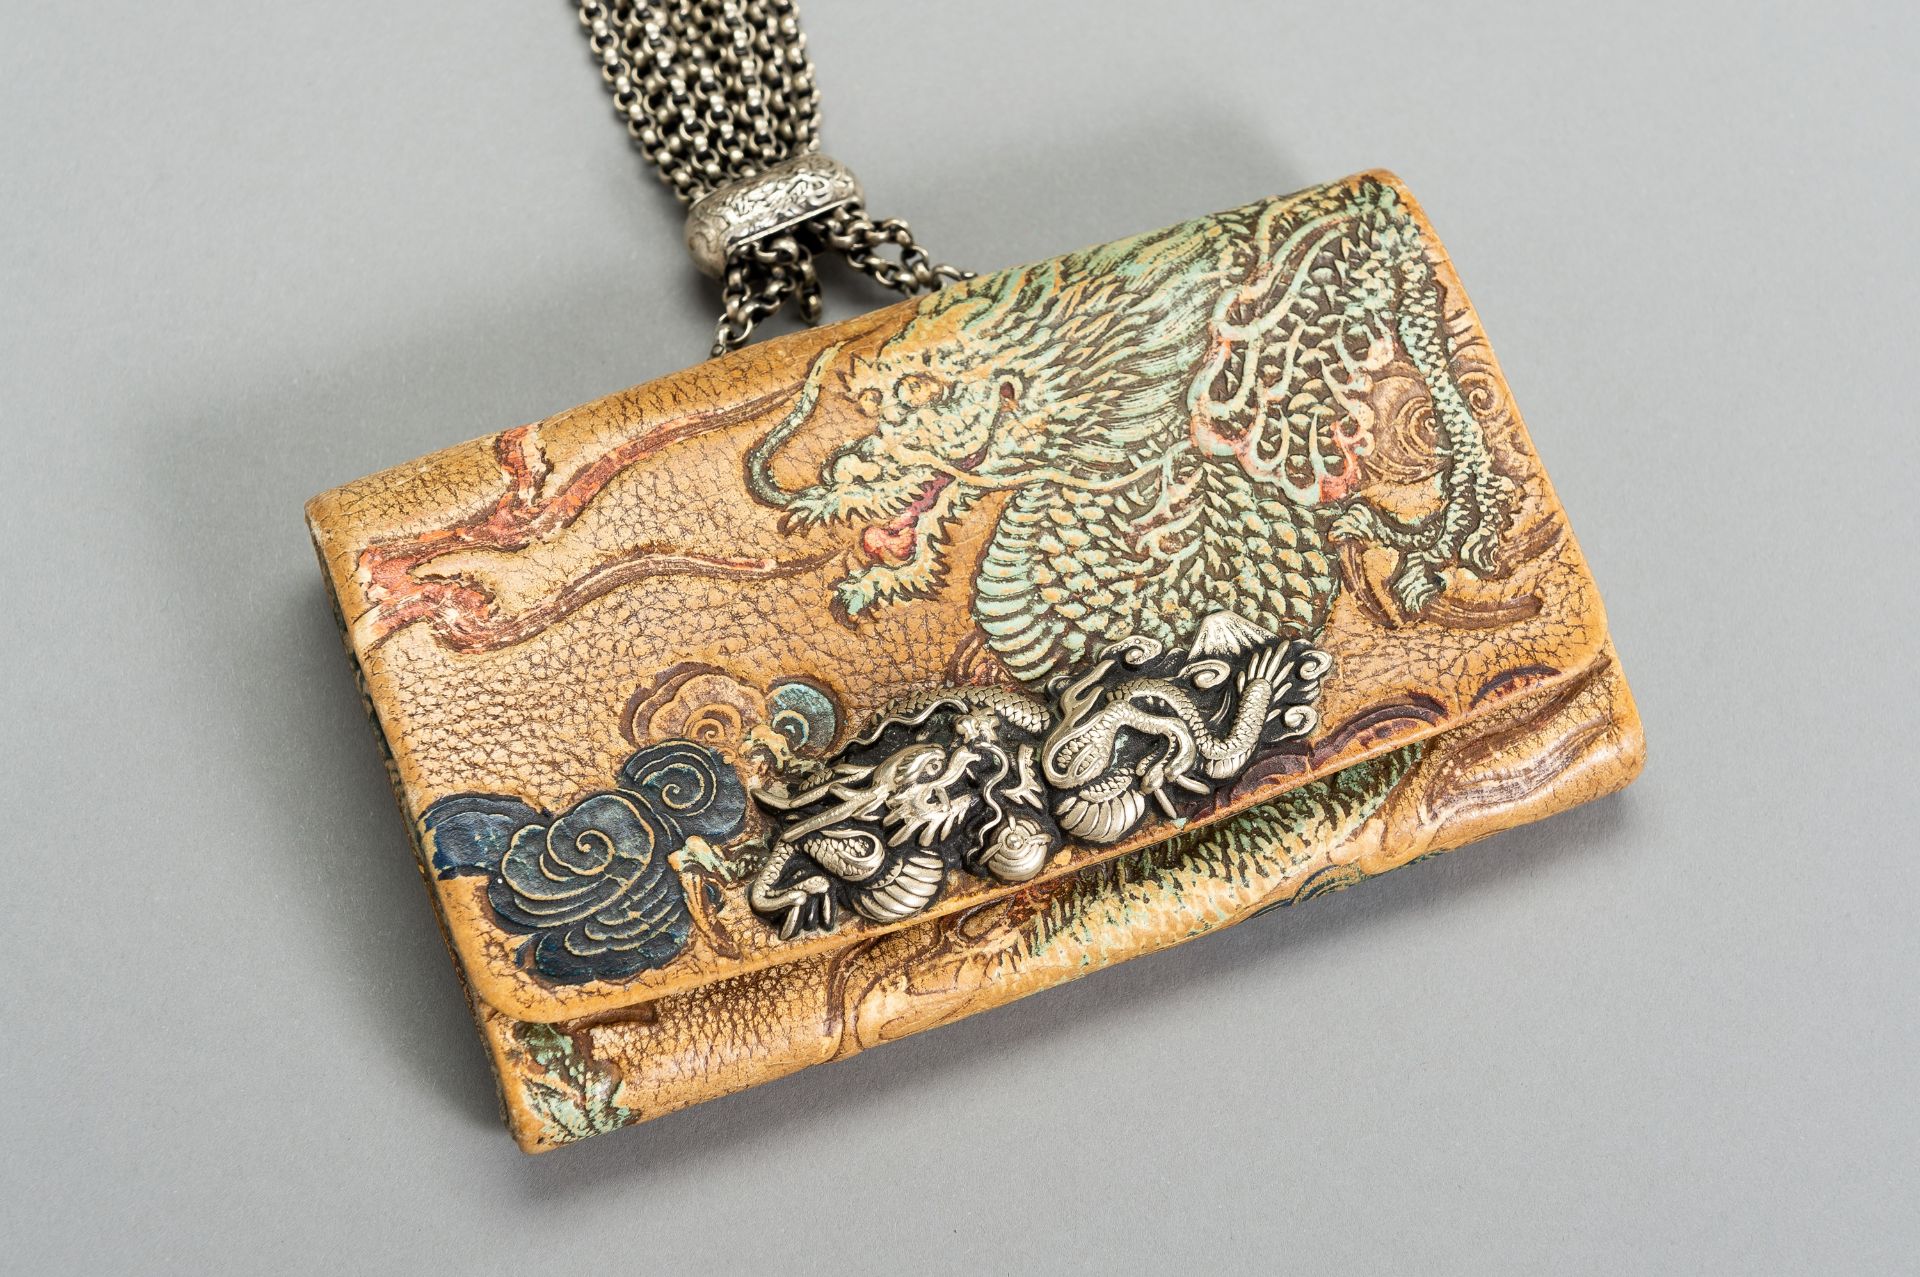 A LEATHER TABAKO-IRE SET WITH DRAGON DECOR - Image 3 of 11